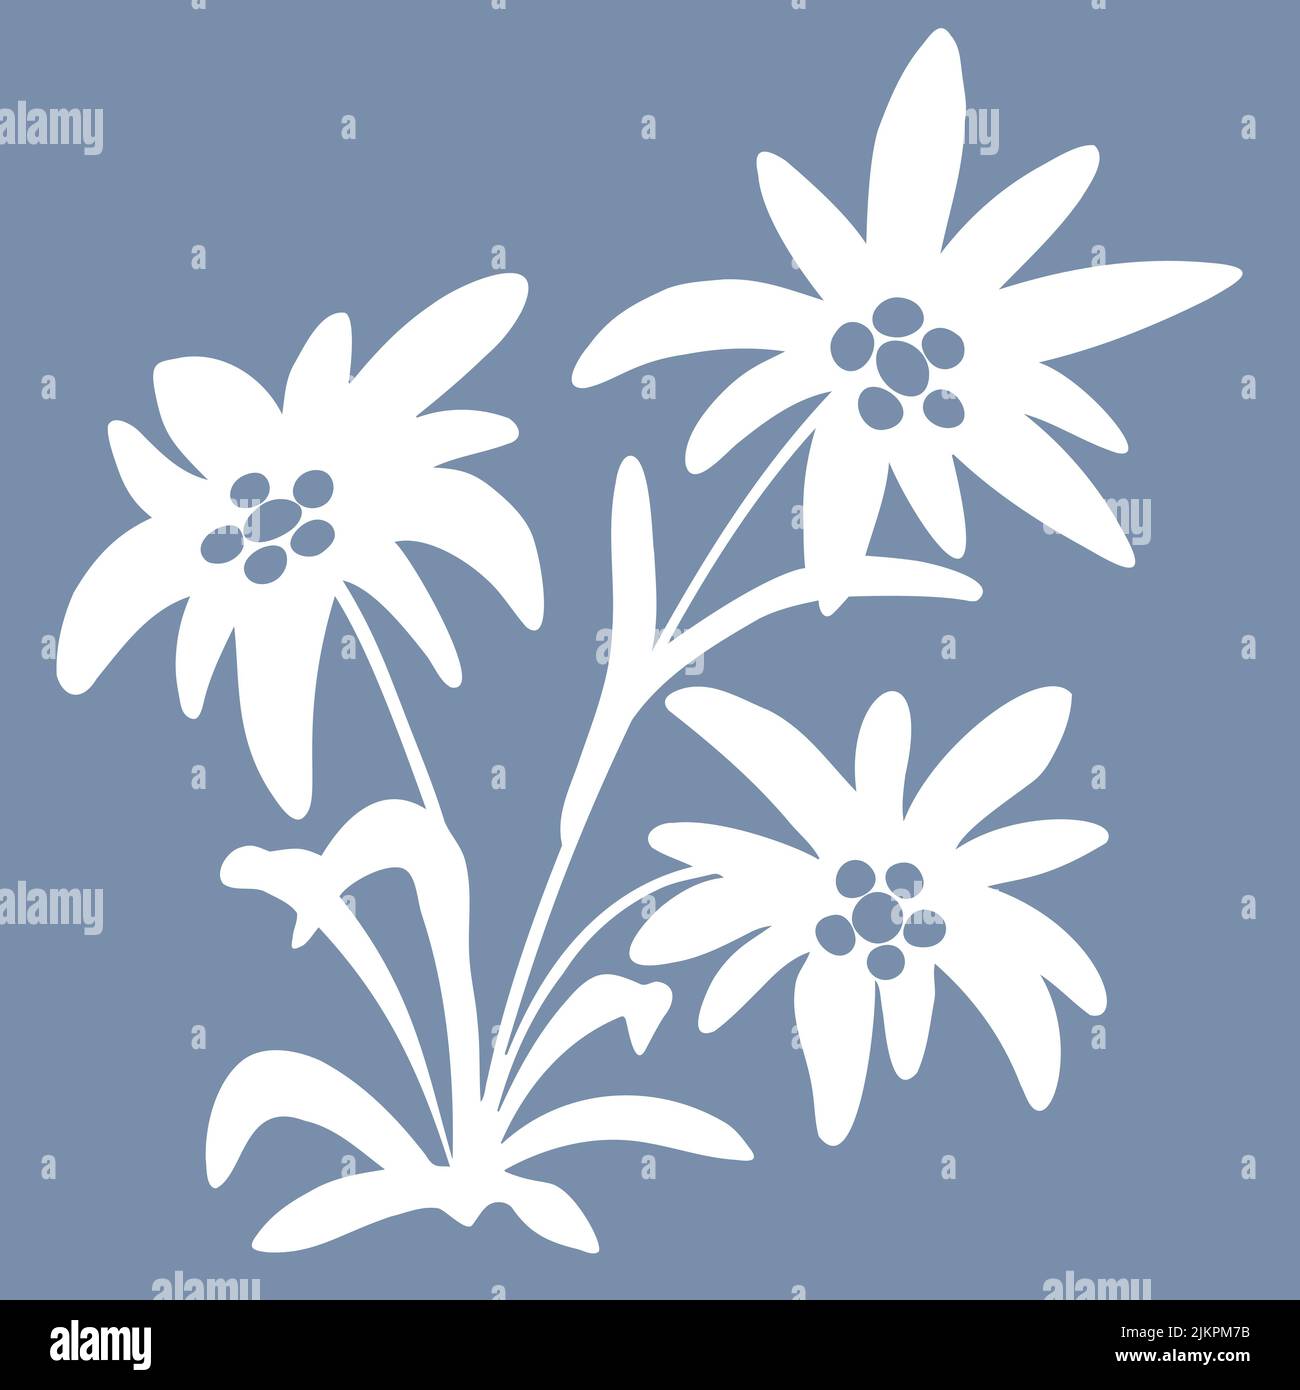 edelweiss flowers. Snow beauty. illustration. Alpine star. swiss symbol. For decoration, prints advertising logo posters invitation Stock Vector